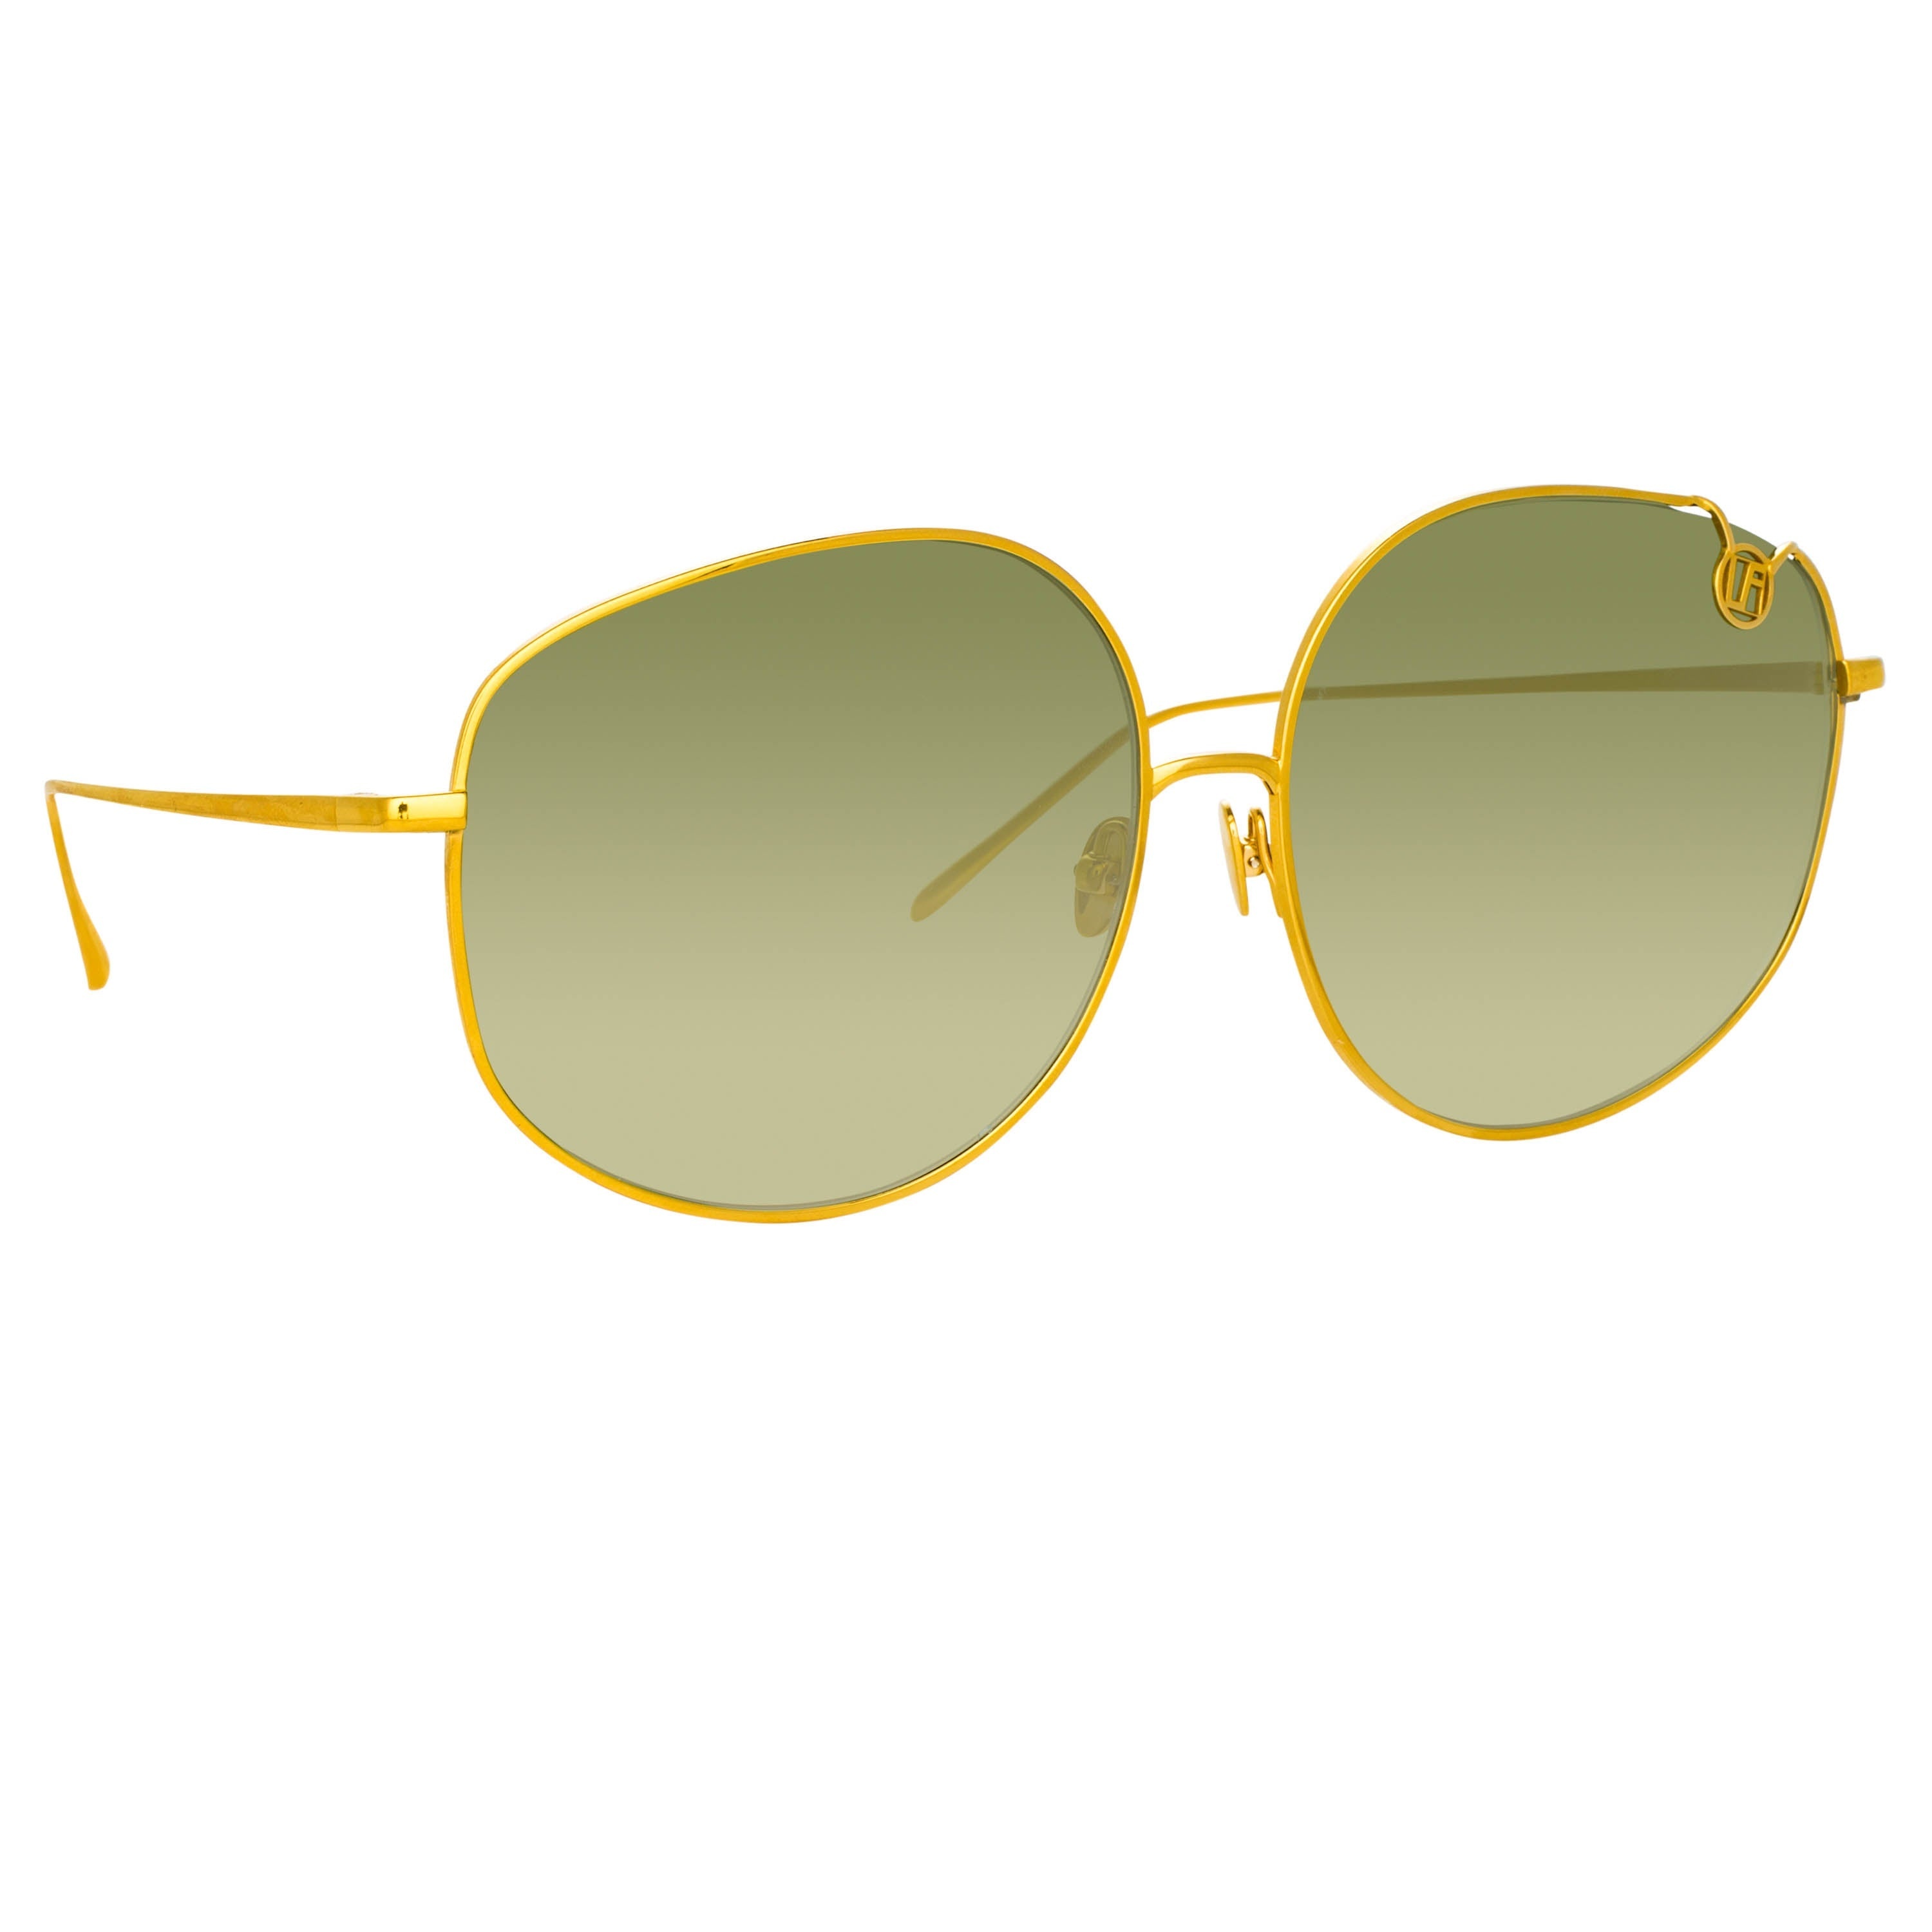 MARISA OVERSIZED SUNGLASSES IN YELLOW GOLD AND GREEN - 4